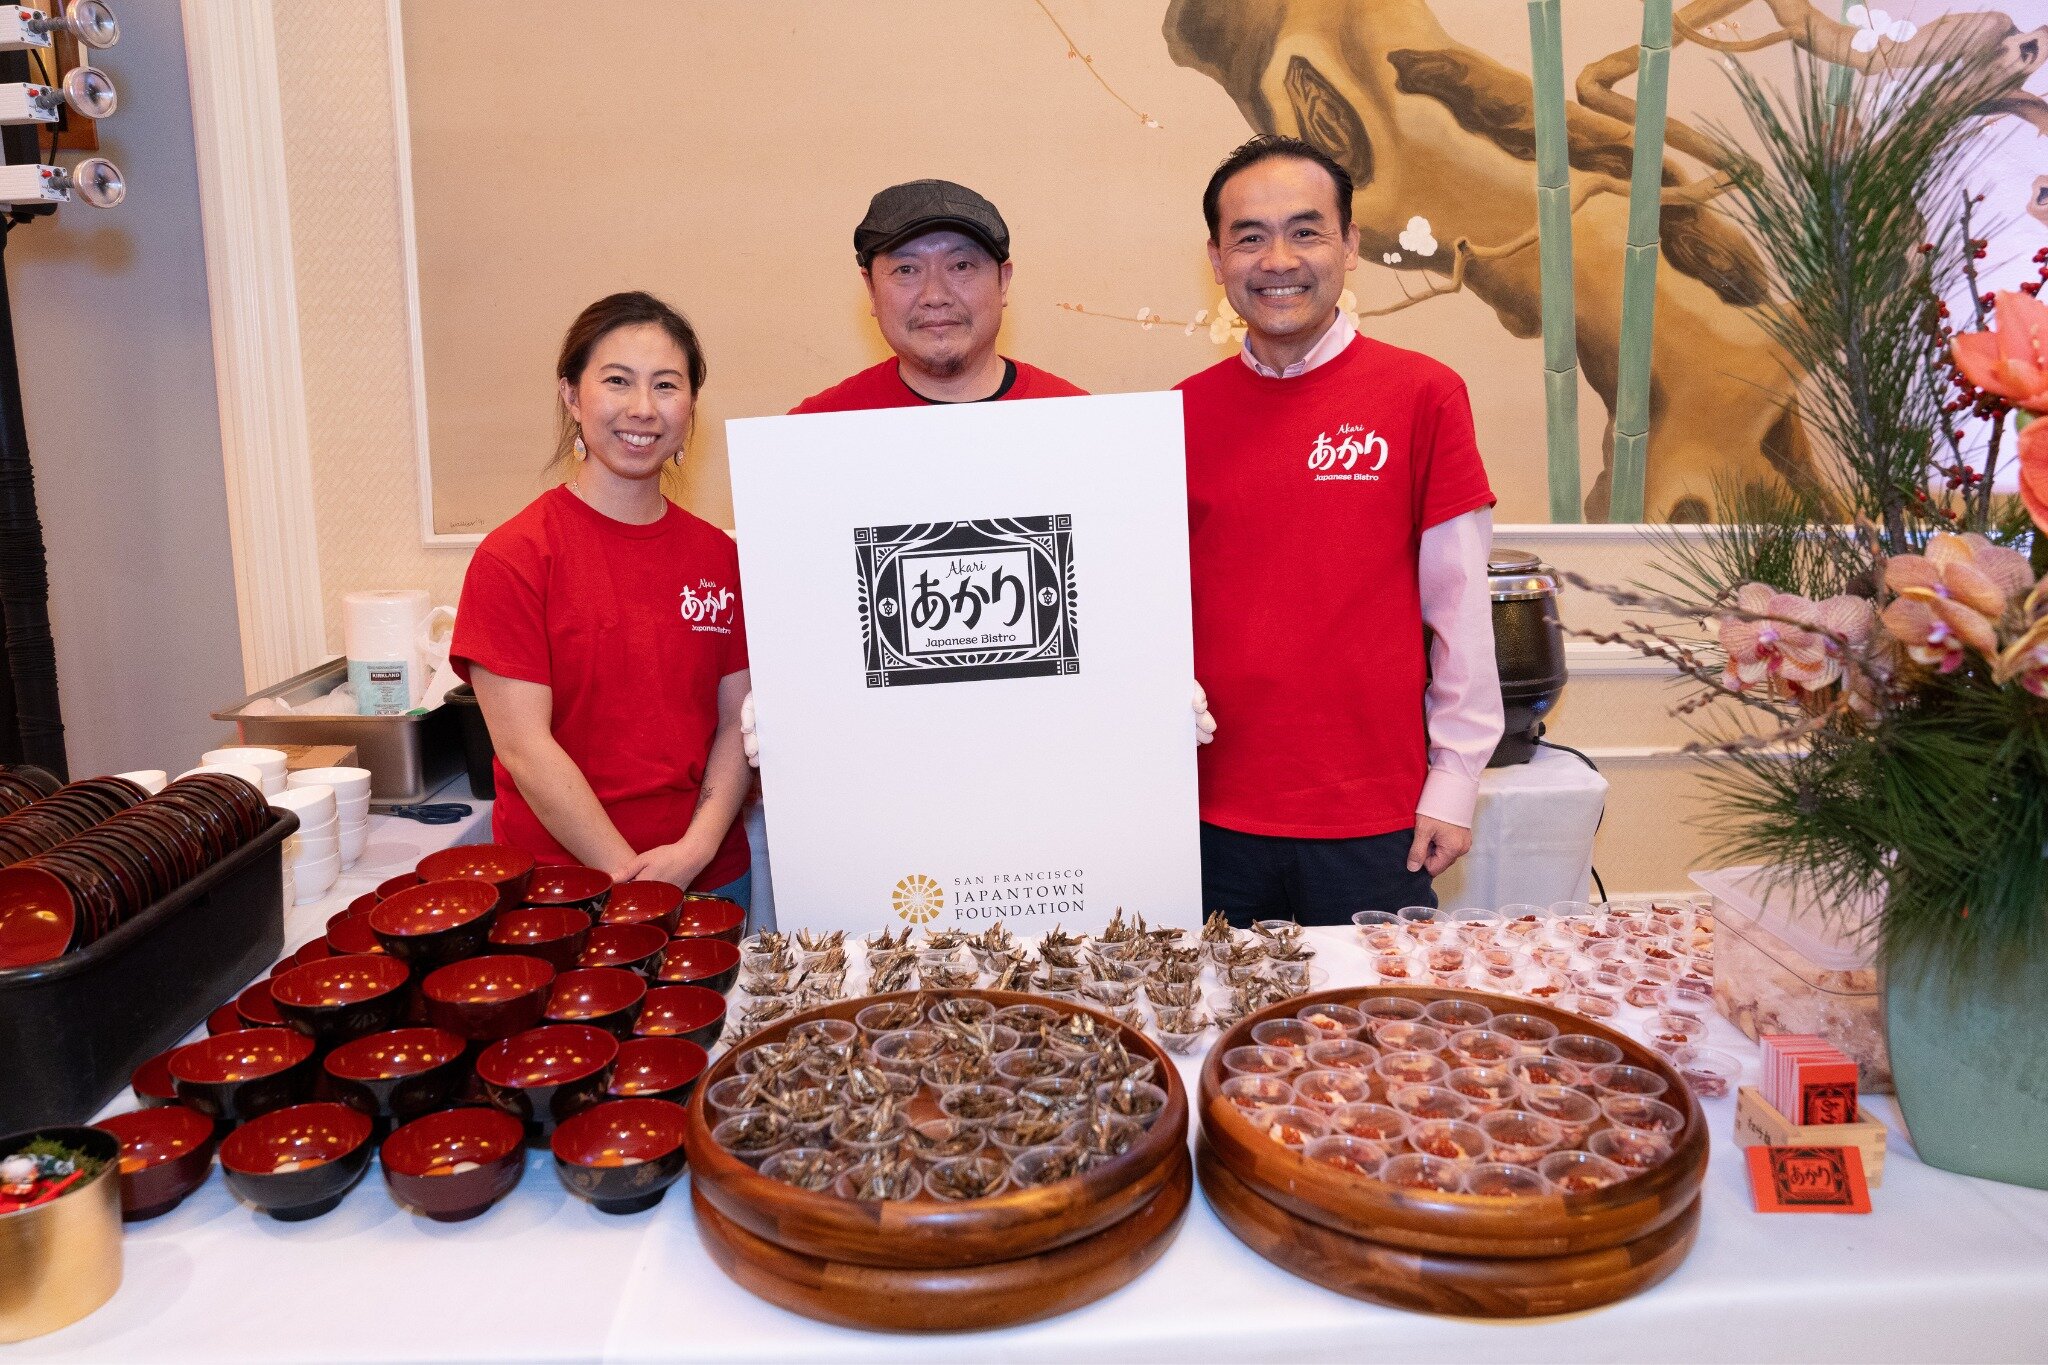 Food Feature: Akari Japanese Bistro 🍱 🍣

At this bistro, they bridge cultures with American-made products infused with Japanese craftsmanship. Their mission is to connect people to Japanese culture through cuisine, hospitality, and smiles. They sup